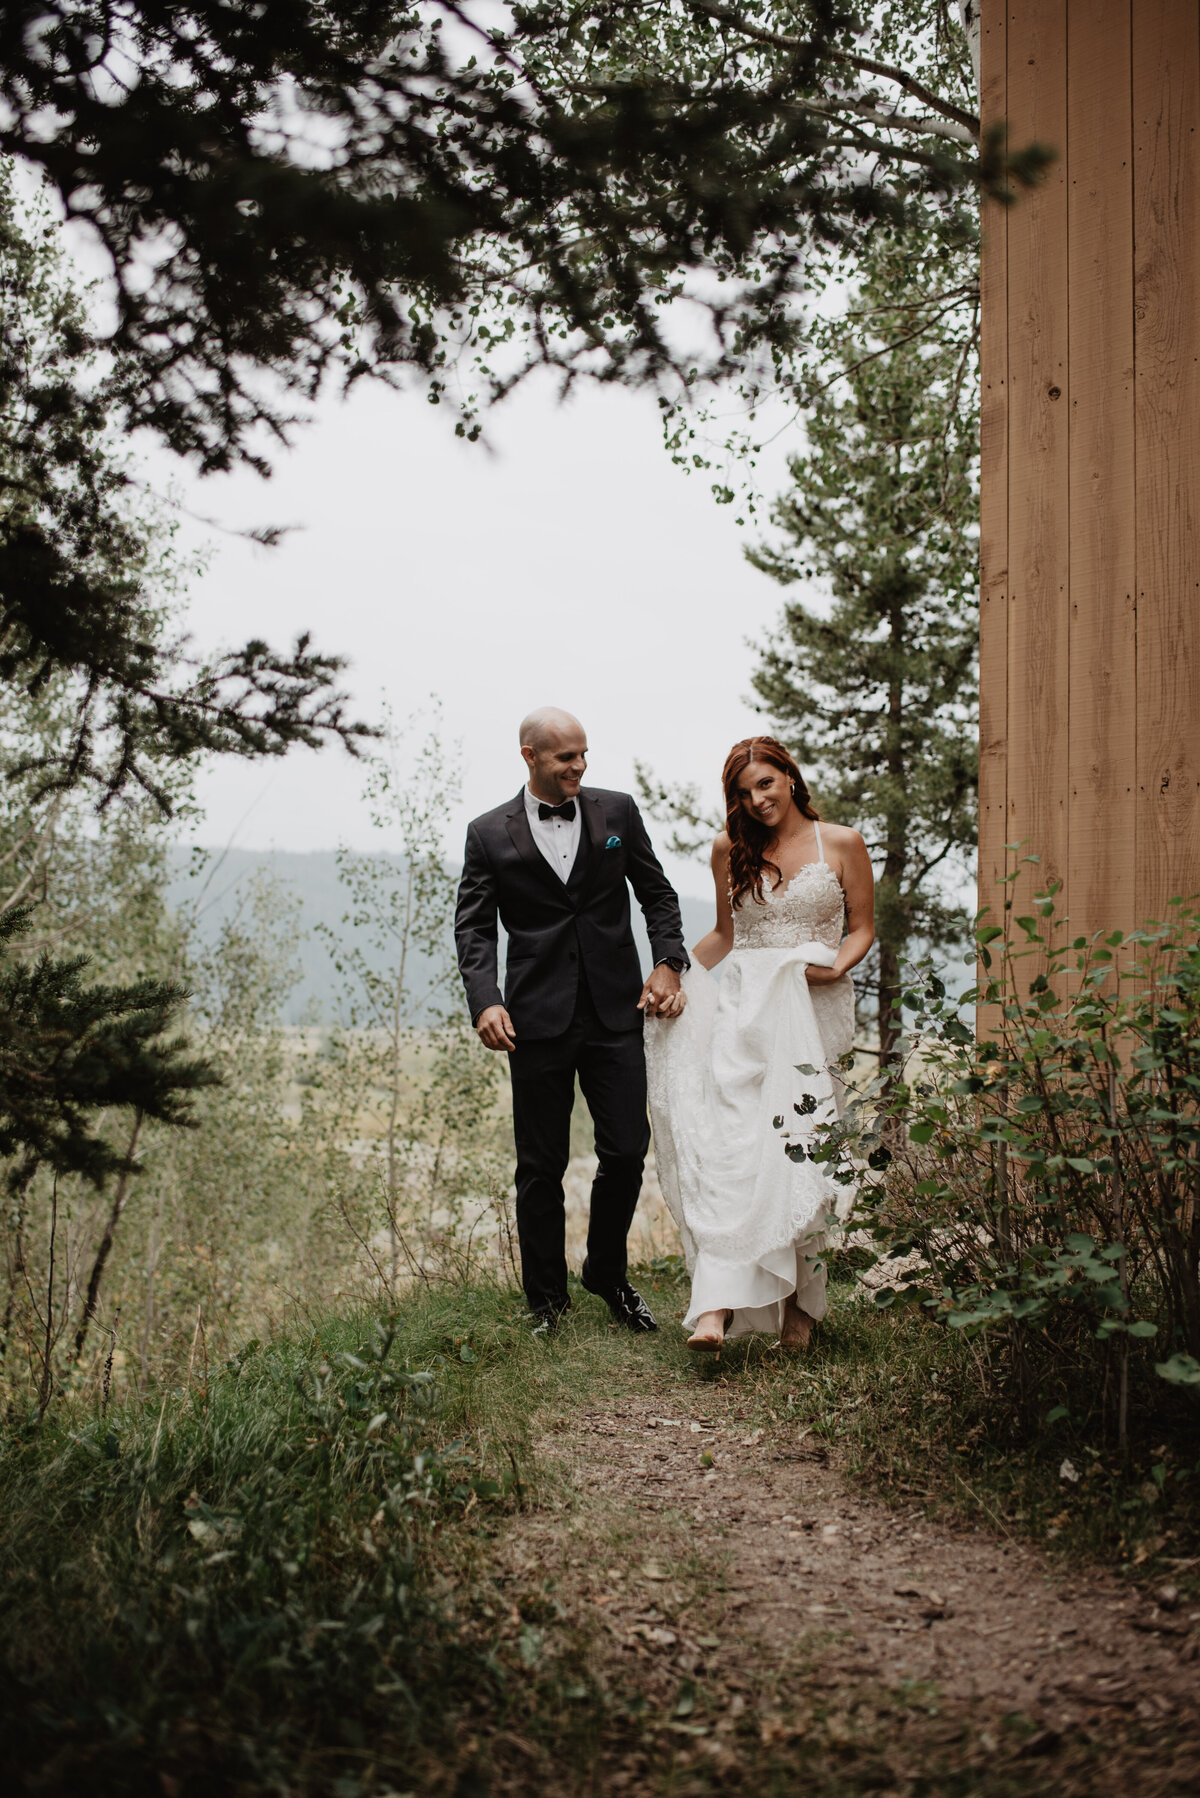 Jackson Hole photographers capture bride and groom holding hands while walking